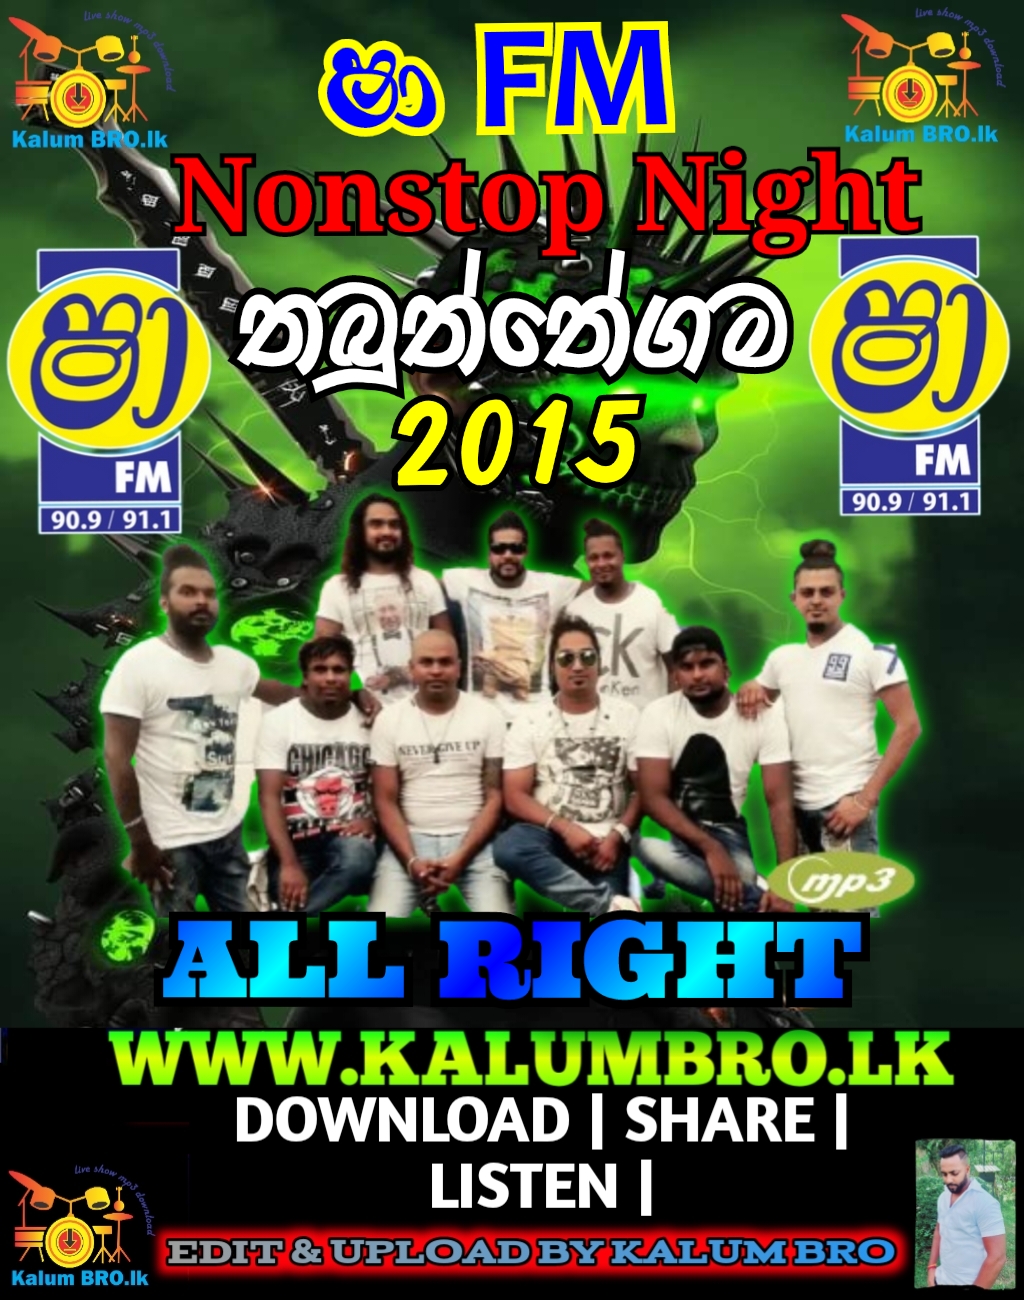 ALL RIGHT LIVE IN SHAA NONSTOP NIGHT THABUTTHEGAMA 2015